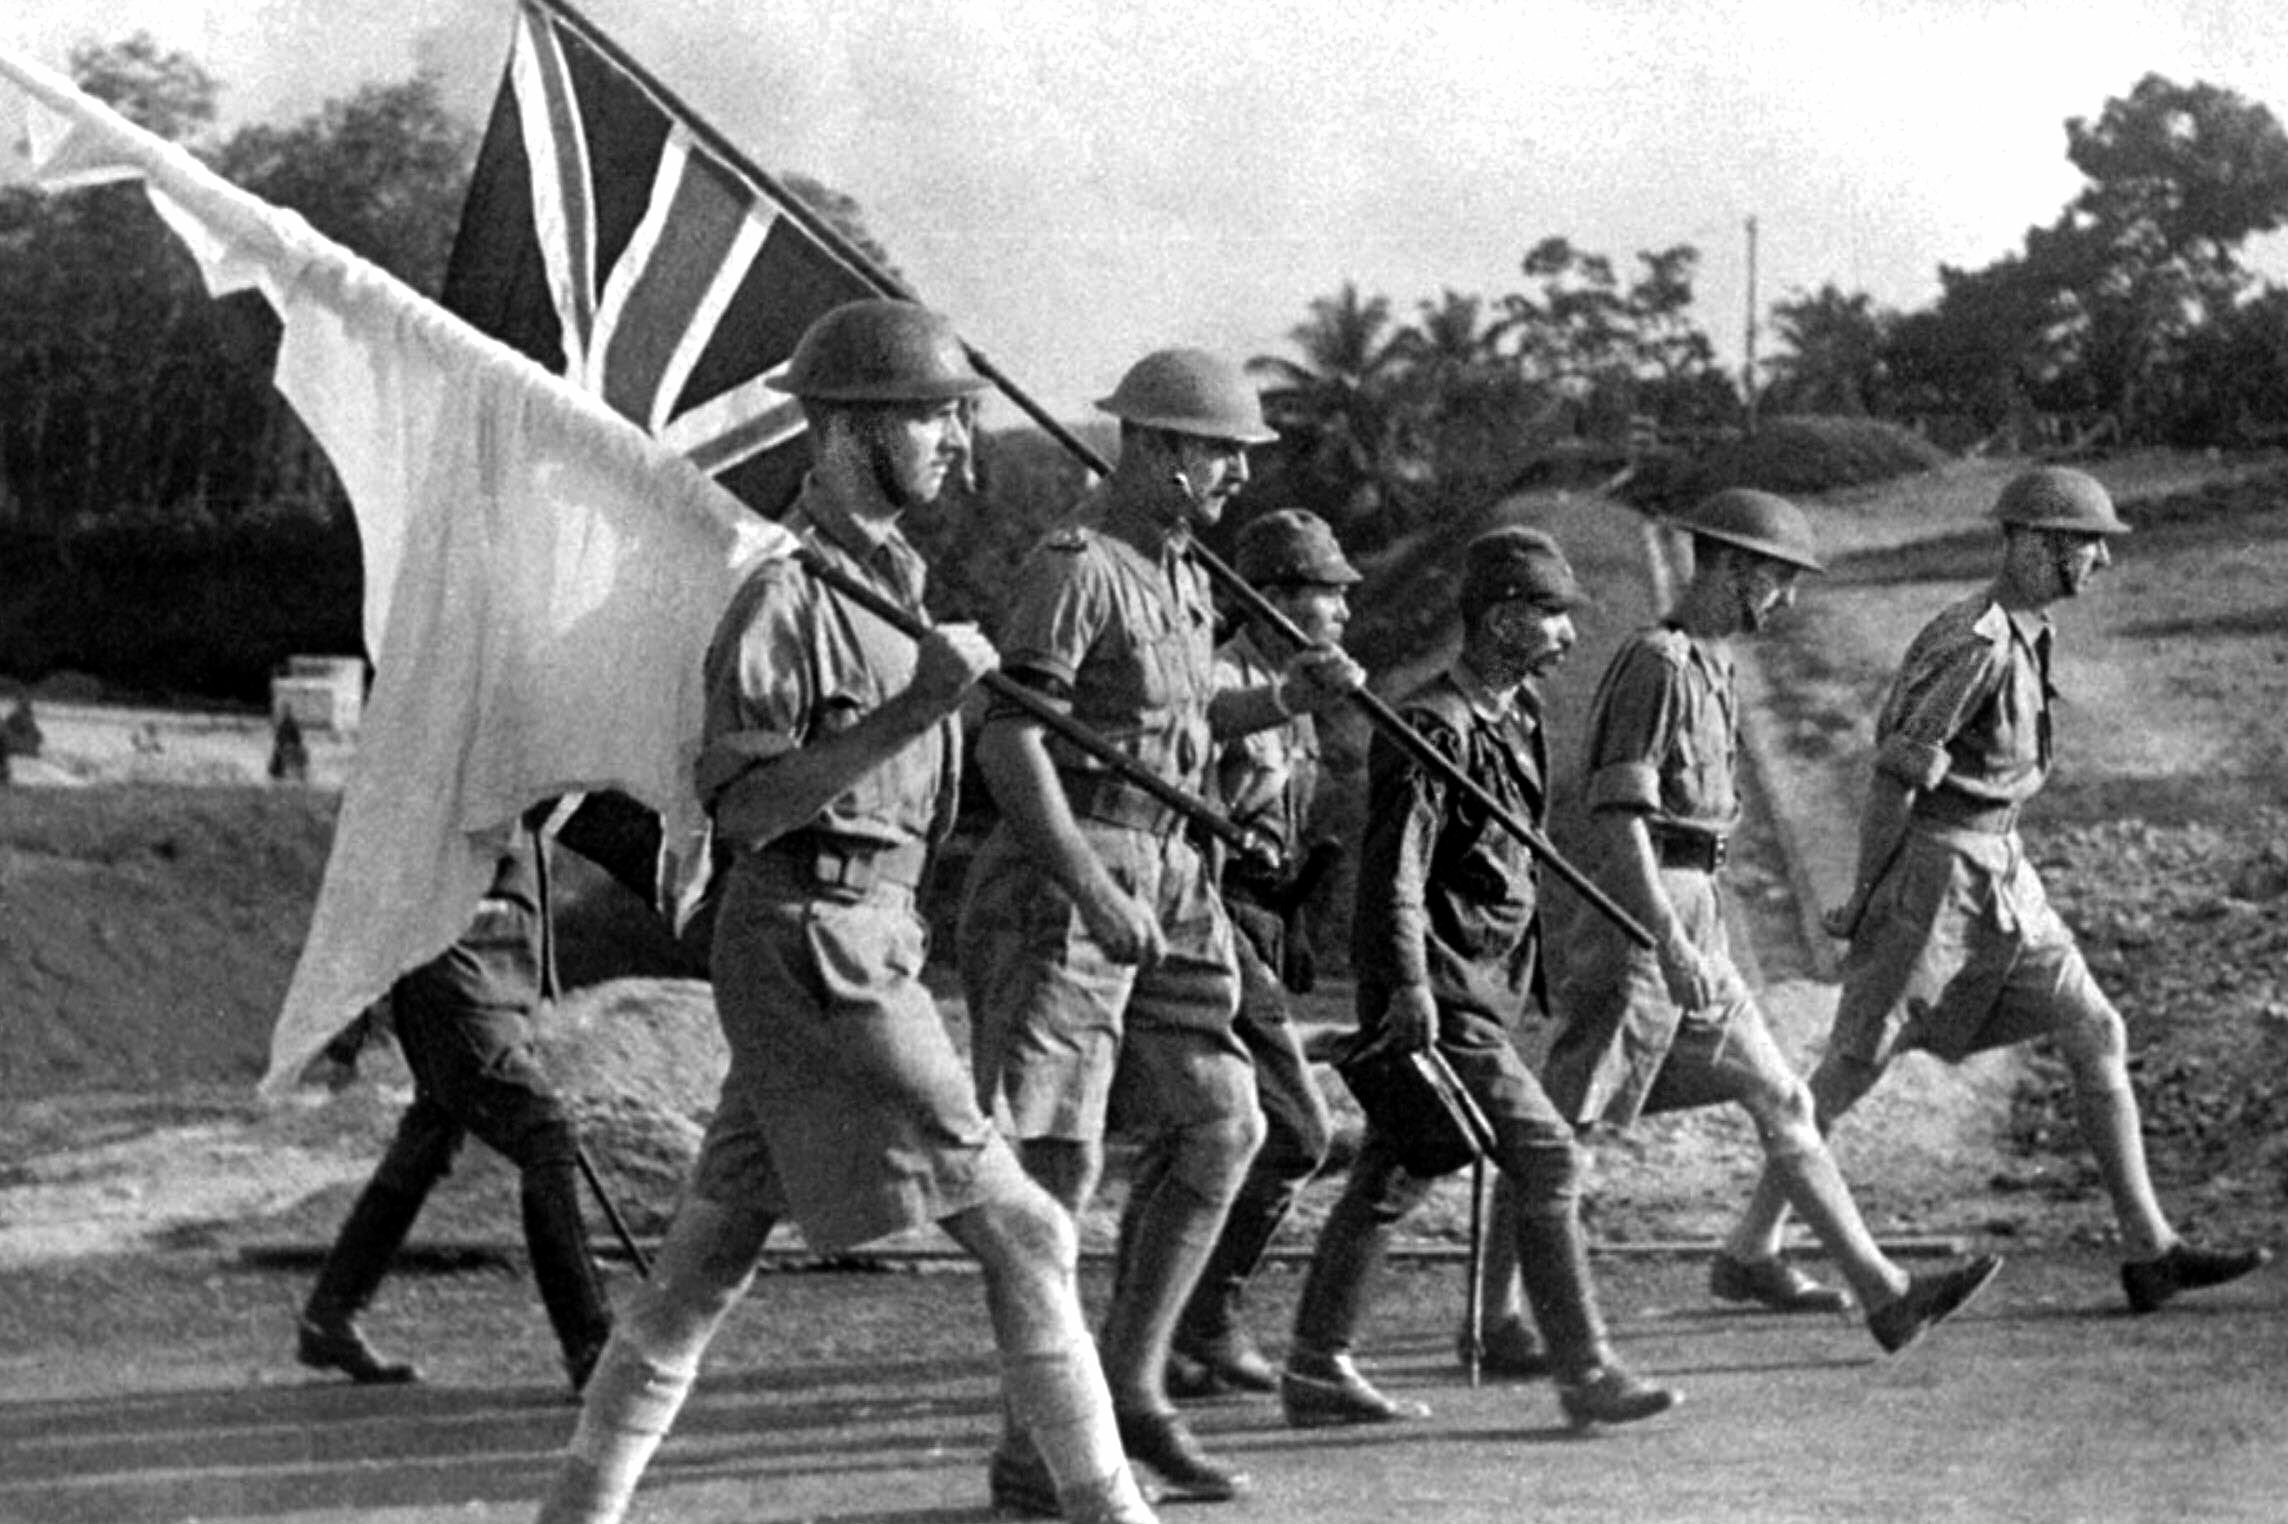 General Arthur Percival, far right, marching to the negotiating table with the surrender of Singapore imminent. Percival is accompanied by soldiers carrying the white flag of truce and the British Union Jack. Yamashita, though victorious, had already spent most of the fighting capability of his command and succeeded in taking Singapore partially with bluff and bluster.
